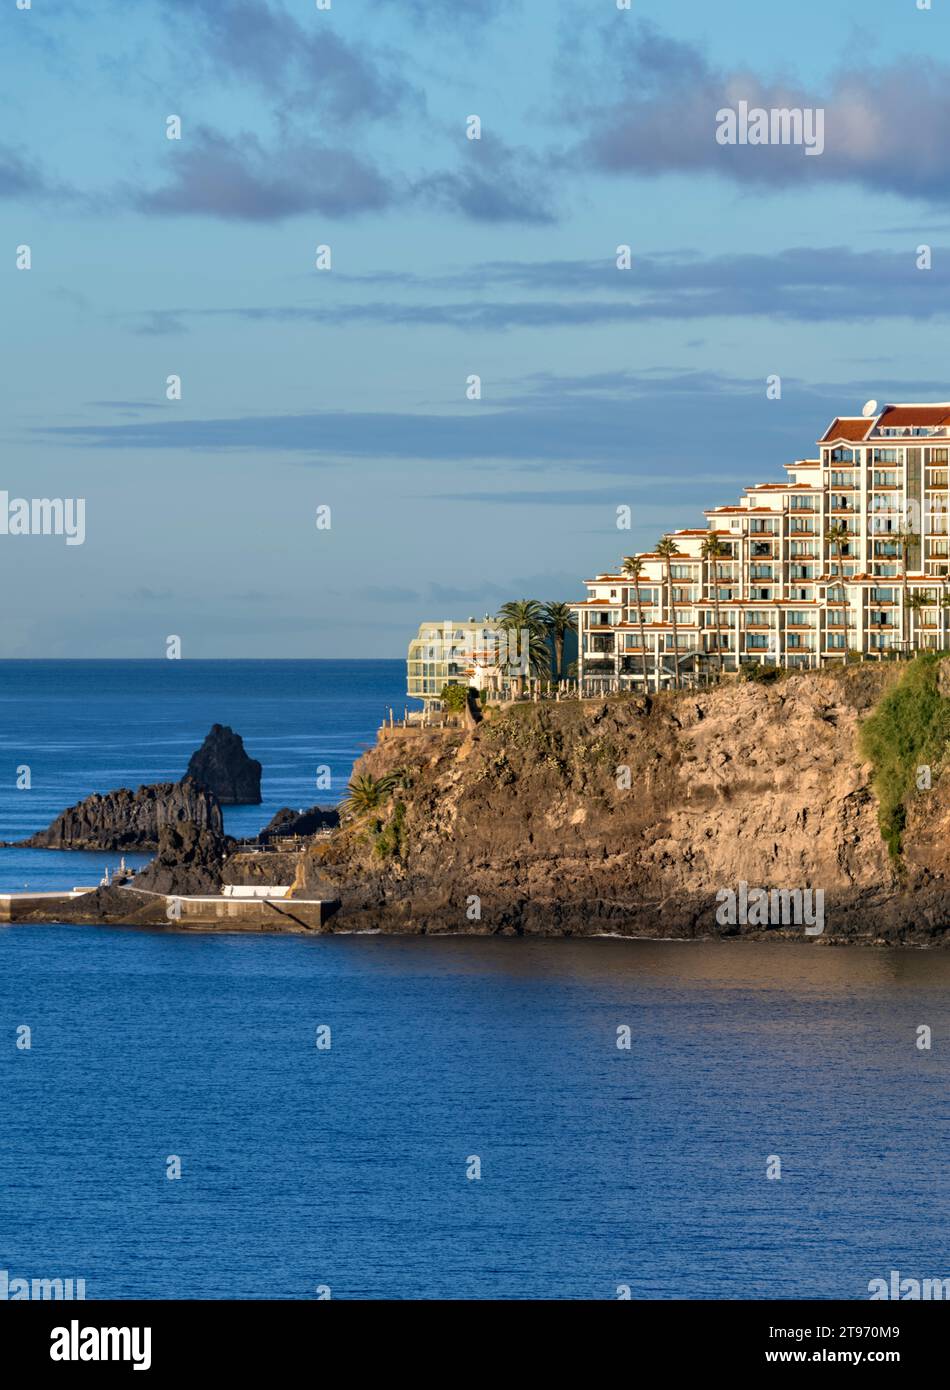 Port and Harbour Funchal, Portugal with surrounding apartment buildings and hotels Stock Photo